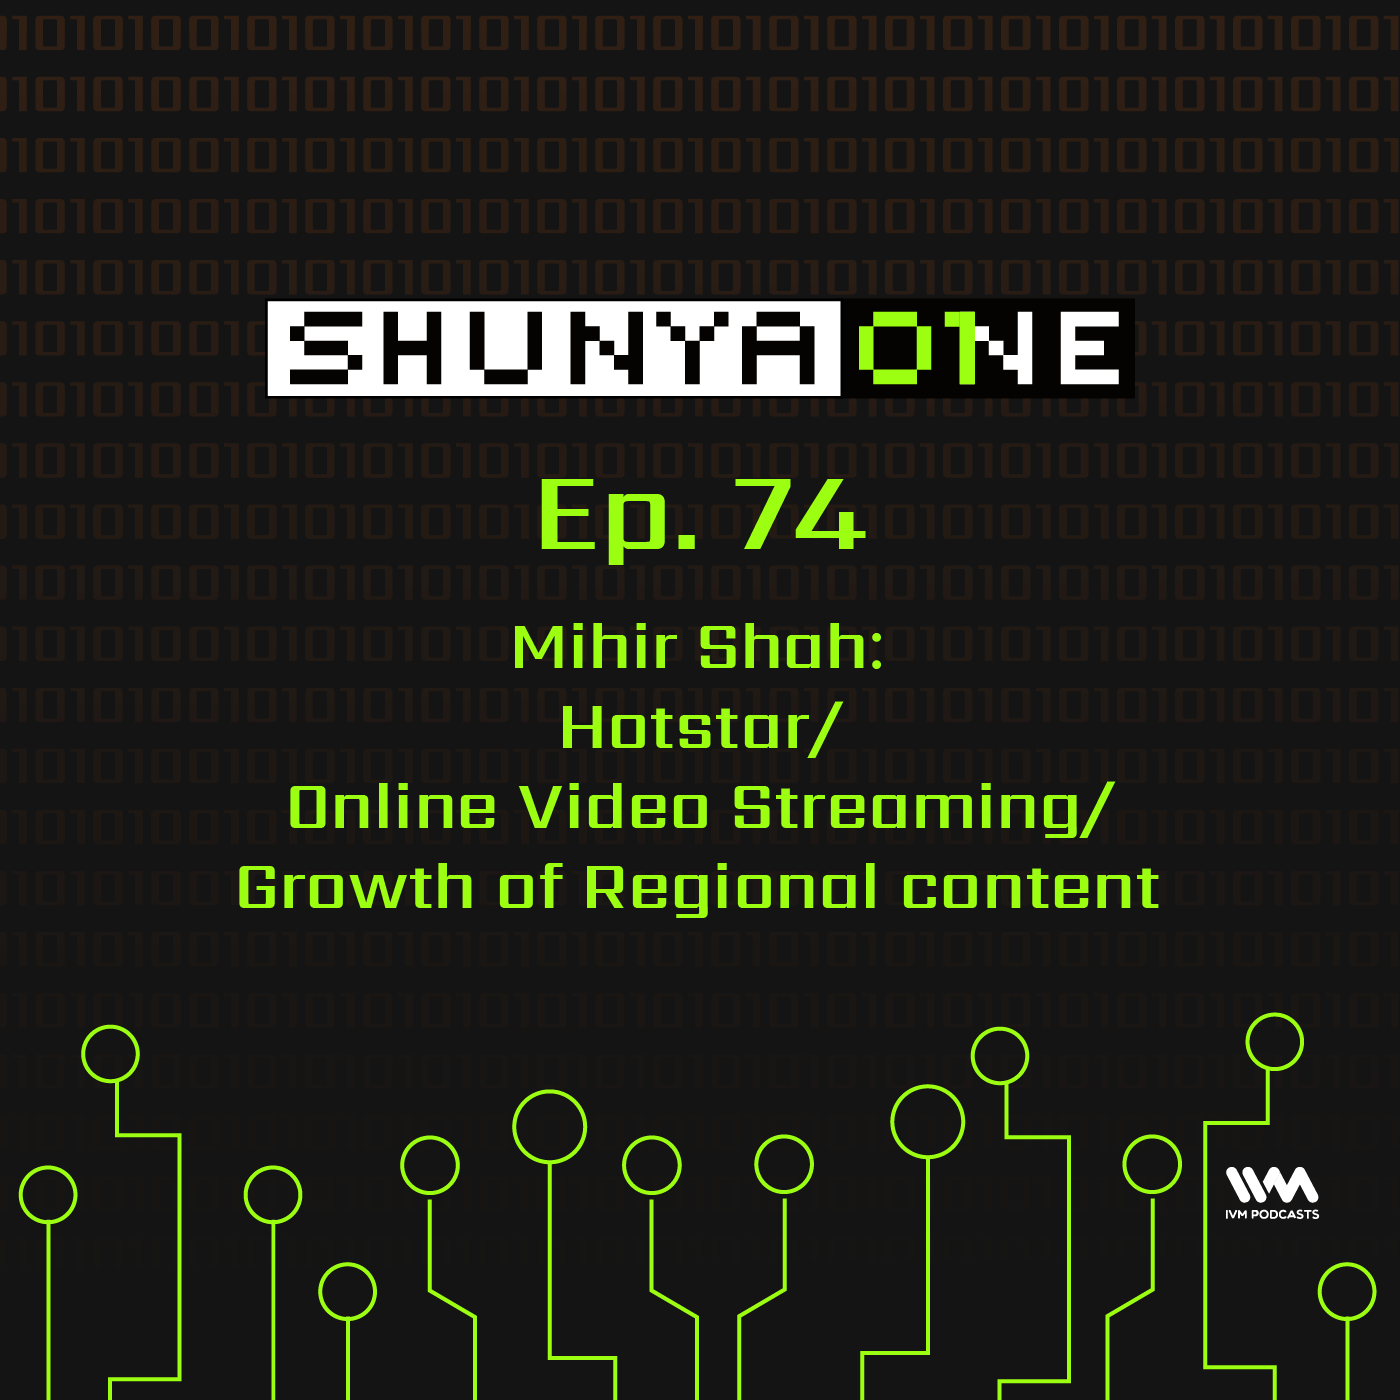 Feat. Mihir Shah: Hotstar / Online Video Streaming/ Growth of Regional content